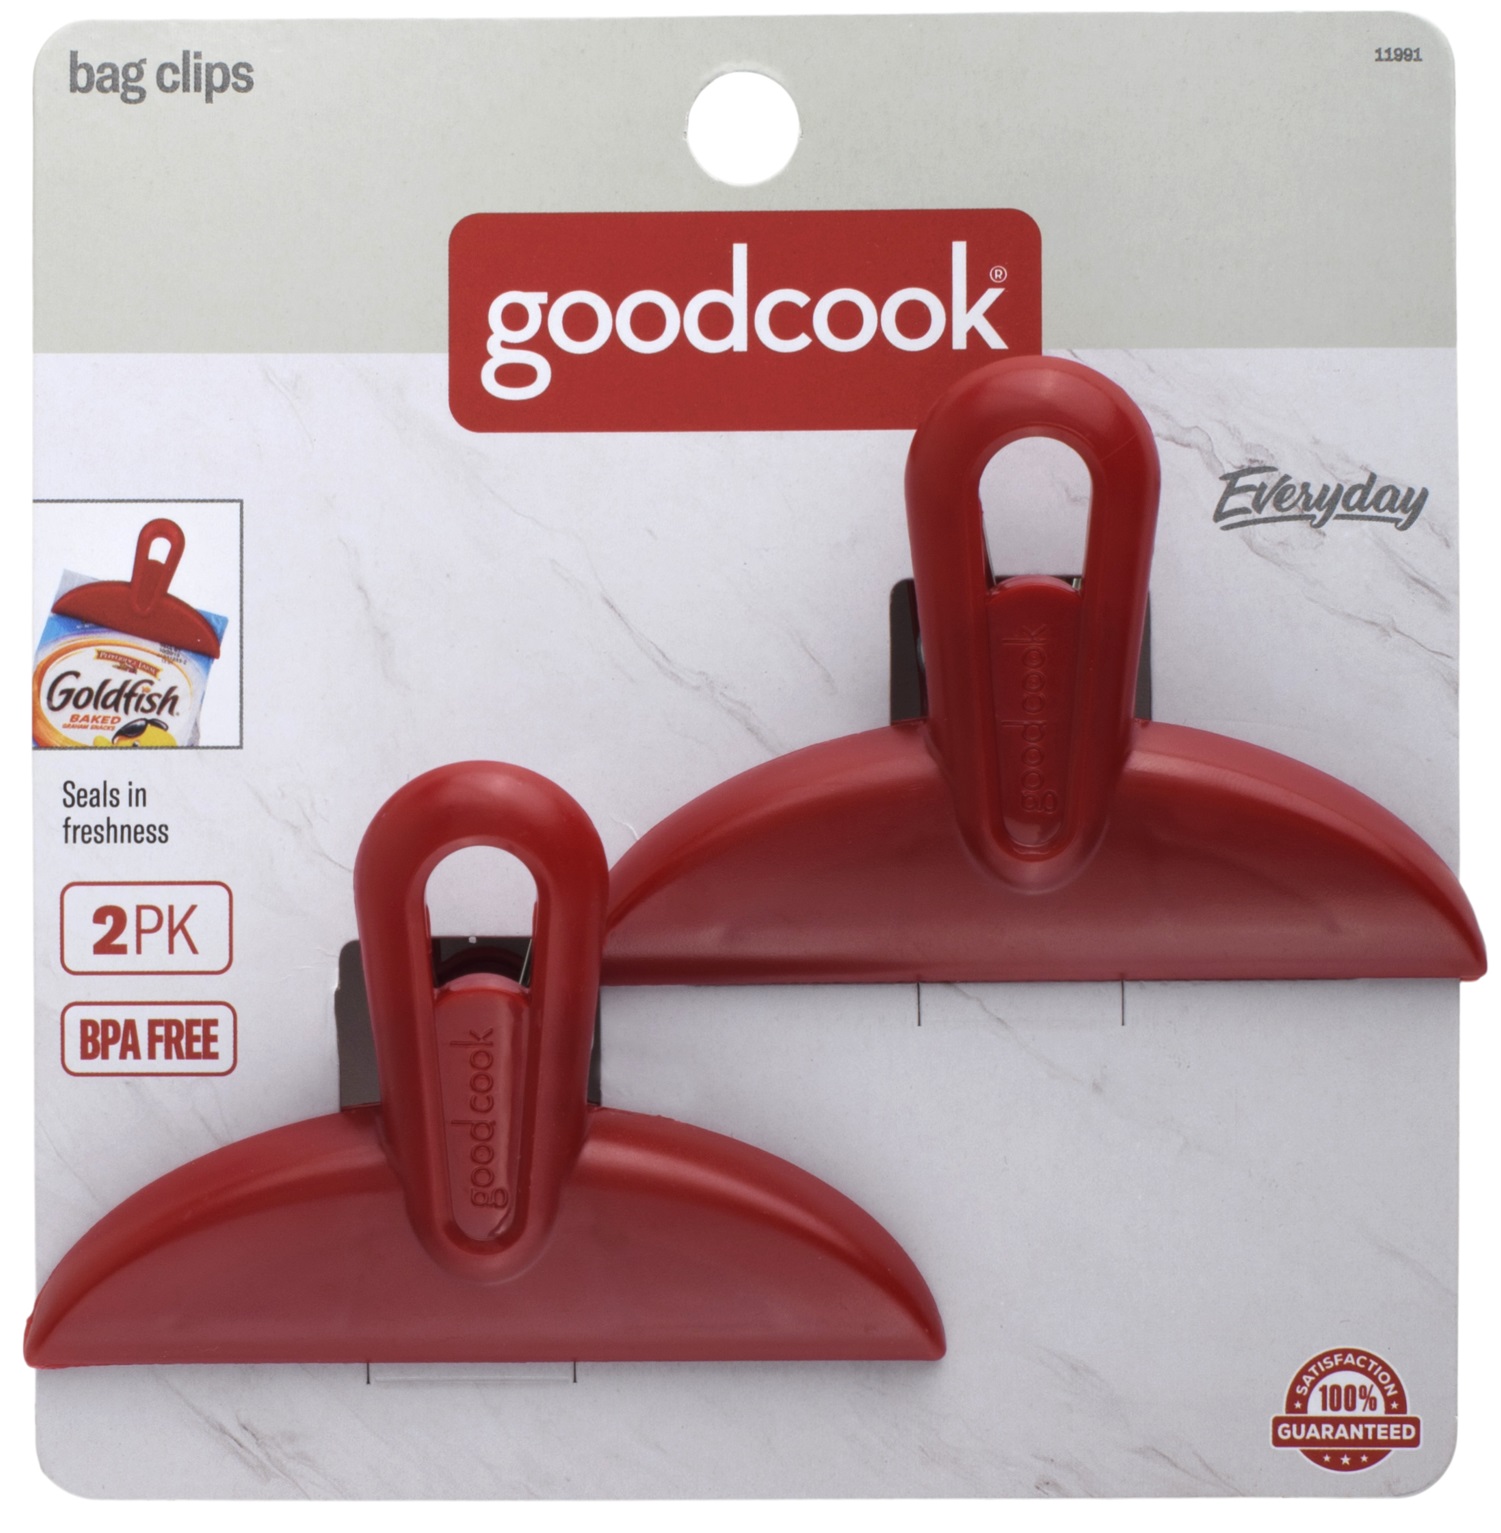 11991_GoodCook_Everyday_Bag Clips 2 Pack_Packaging 1.psd